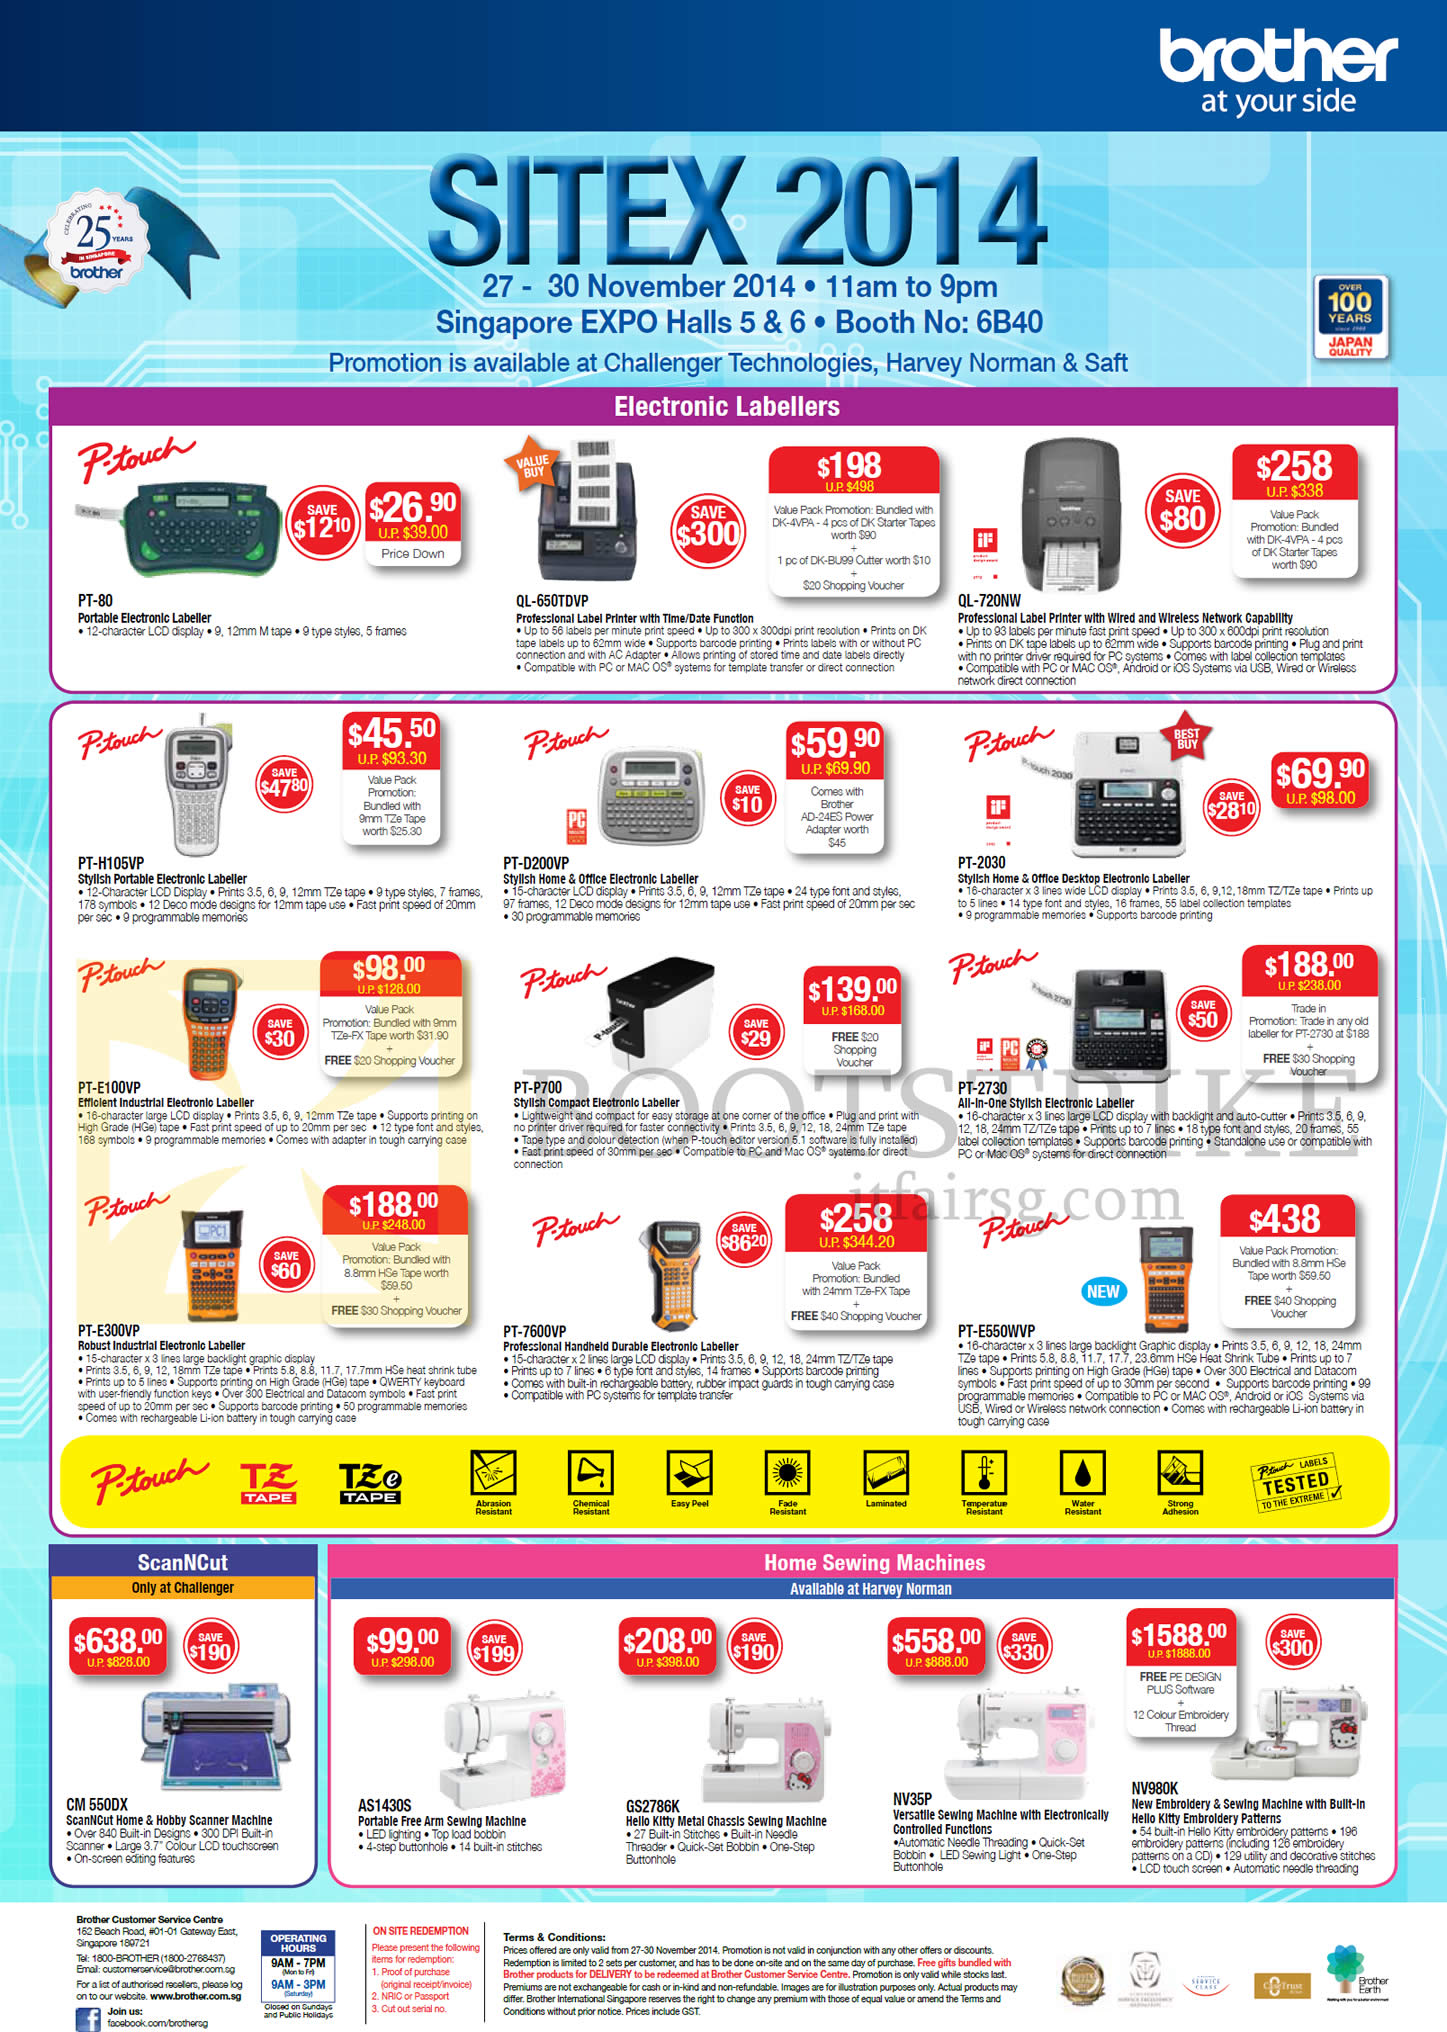 SITEX 2014 price list image brochure of Brother Electronic Labellers, Scanners, Sewing Machines, P-Touch PT-80, QL-650TDVP, QL-720NW, PT-H105VP, PT-7600VP, PT-E550WVP, CM 550DX, AS1430S, GS2786K, NV35P, NV980K